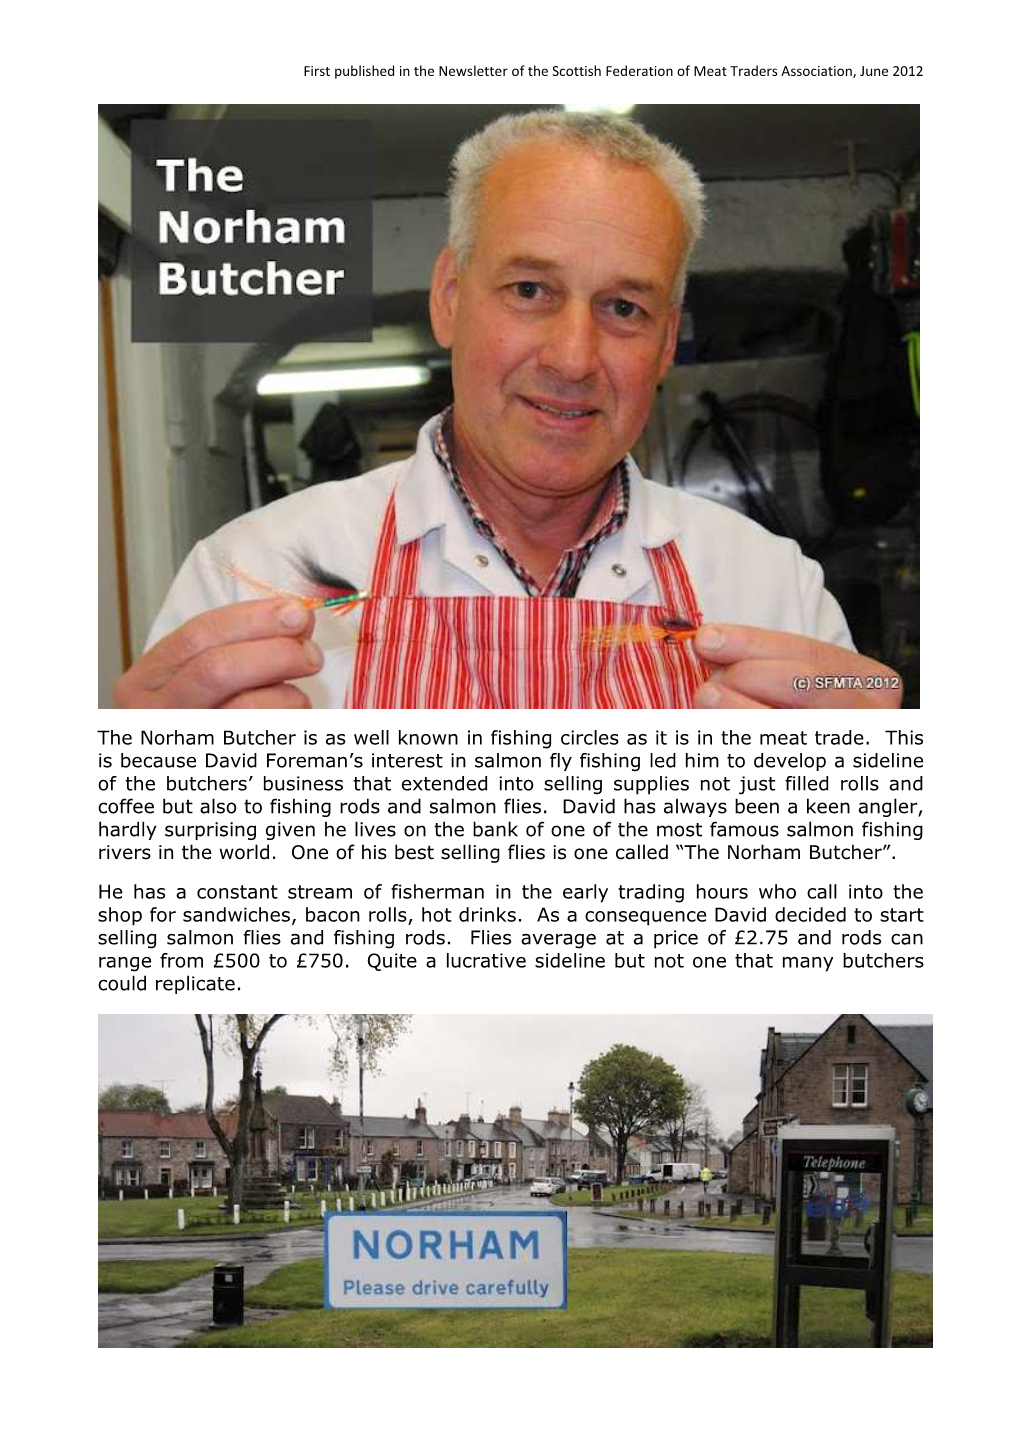 The Norham Butcher Is As Well Known in Fishing Circles As It Is in the Meat Trade